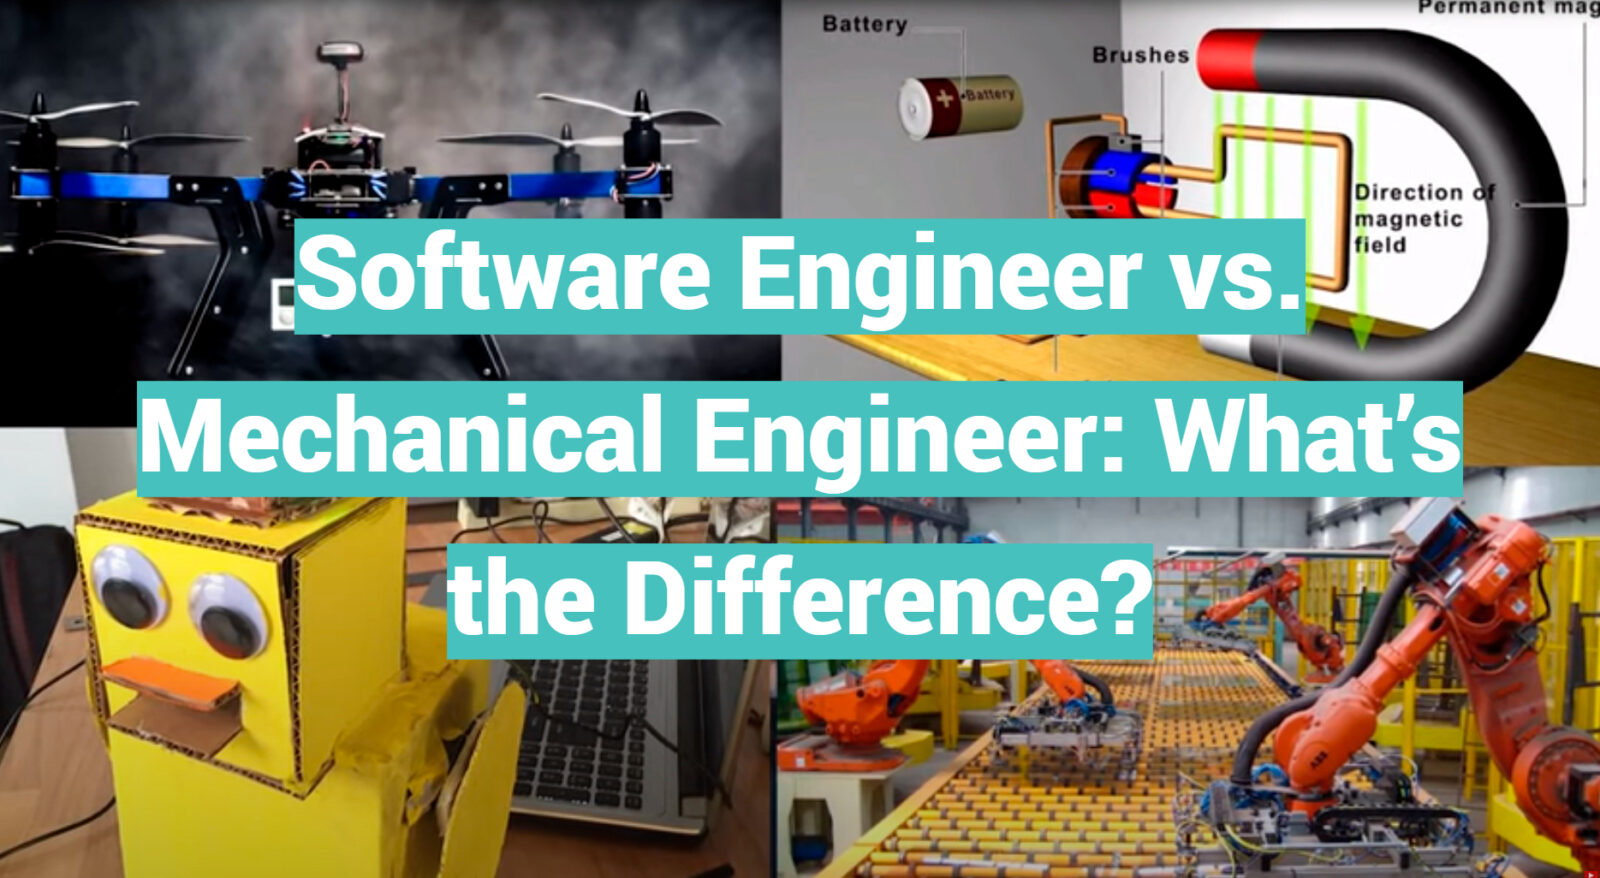 Software Engineer vs. Mechanical Engineer: What’s the Difference?